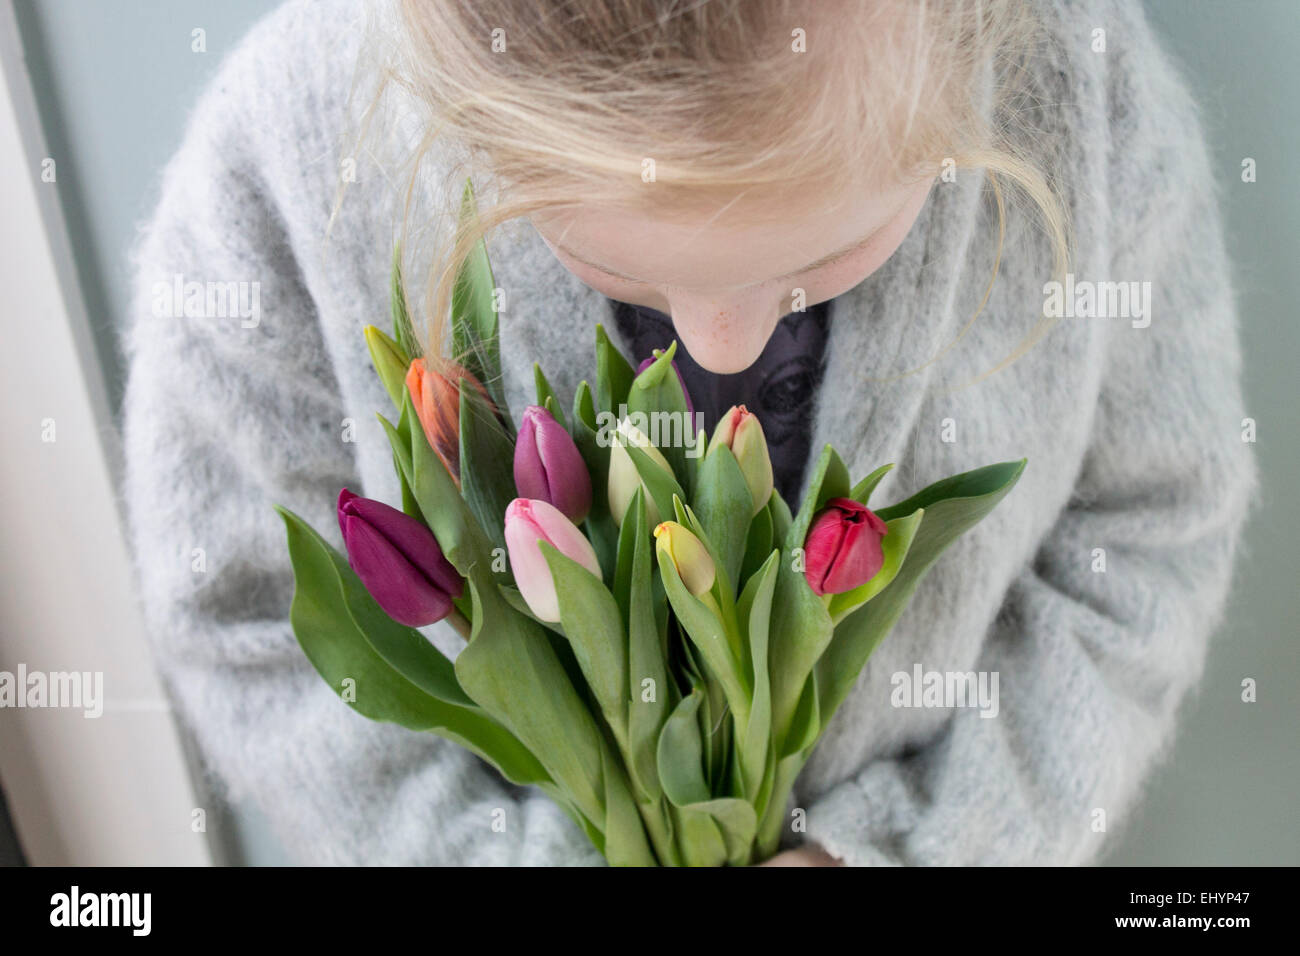 Girl holding a bunch of tulips Banque D'Images